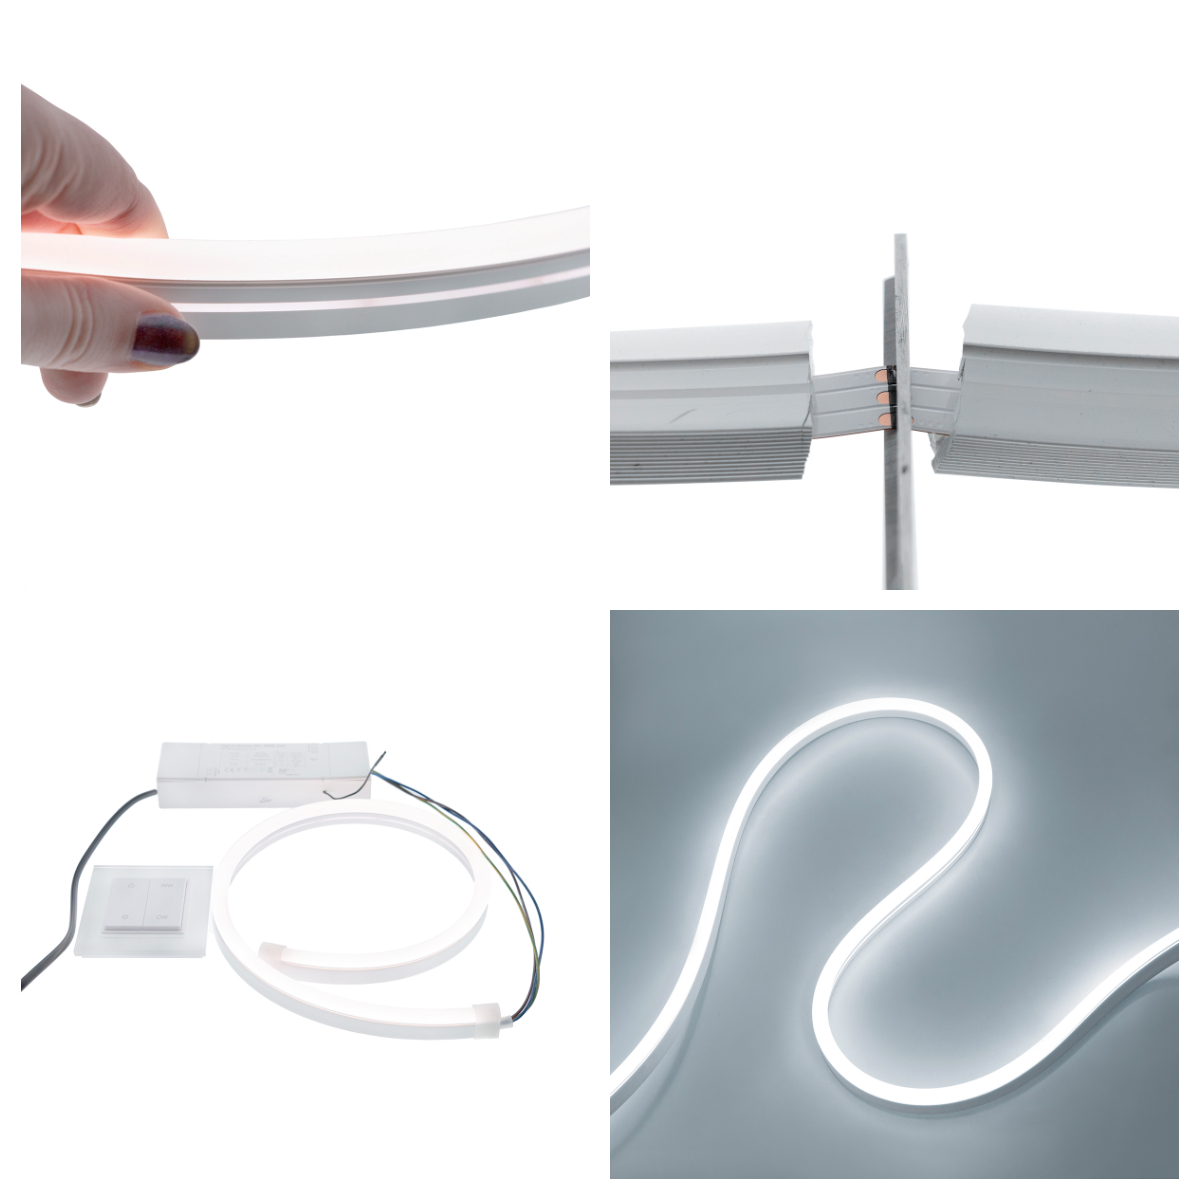 Curved shapes with LED are possible with LED NEON strip.